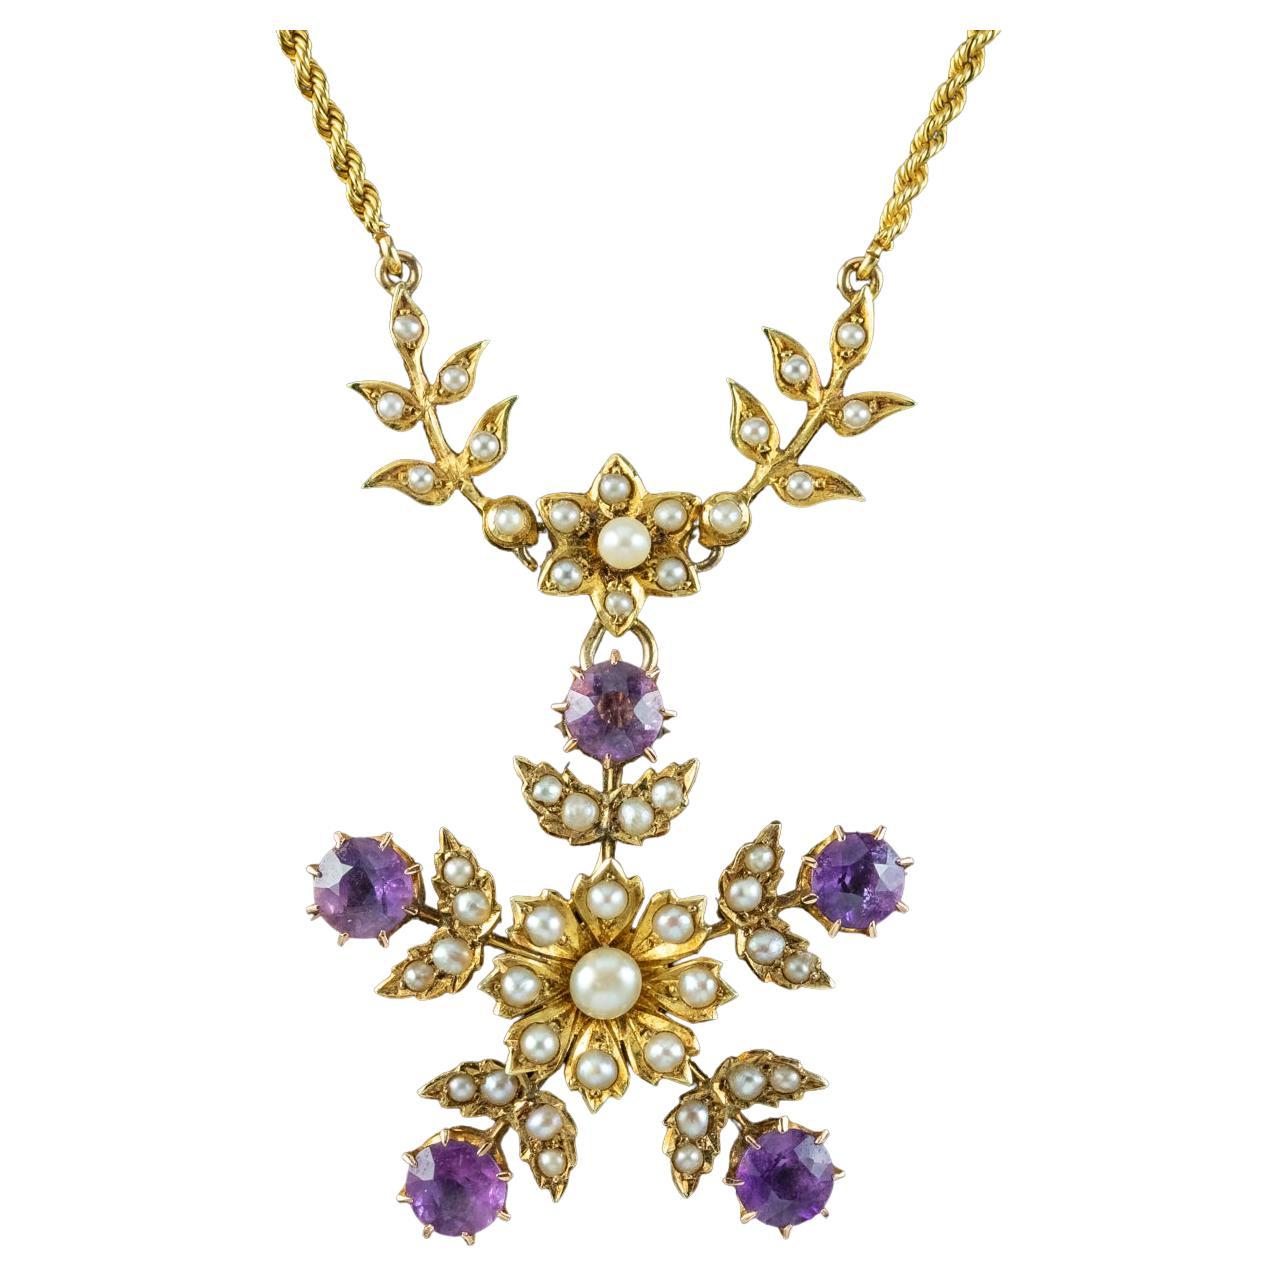 Antique Edwardian Amethyst Pearl Floral Lavaliere Necklace 15ct Gold